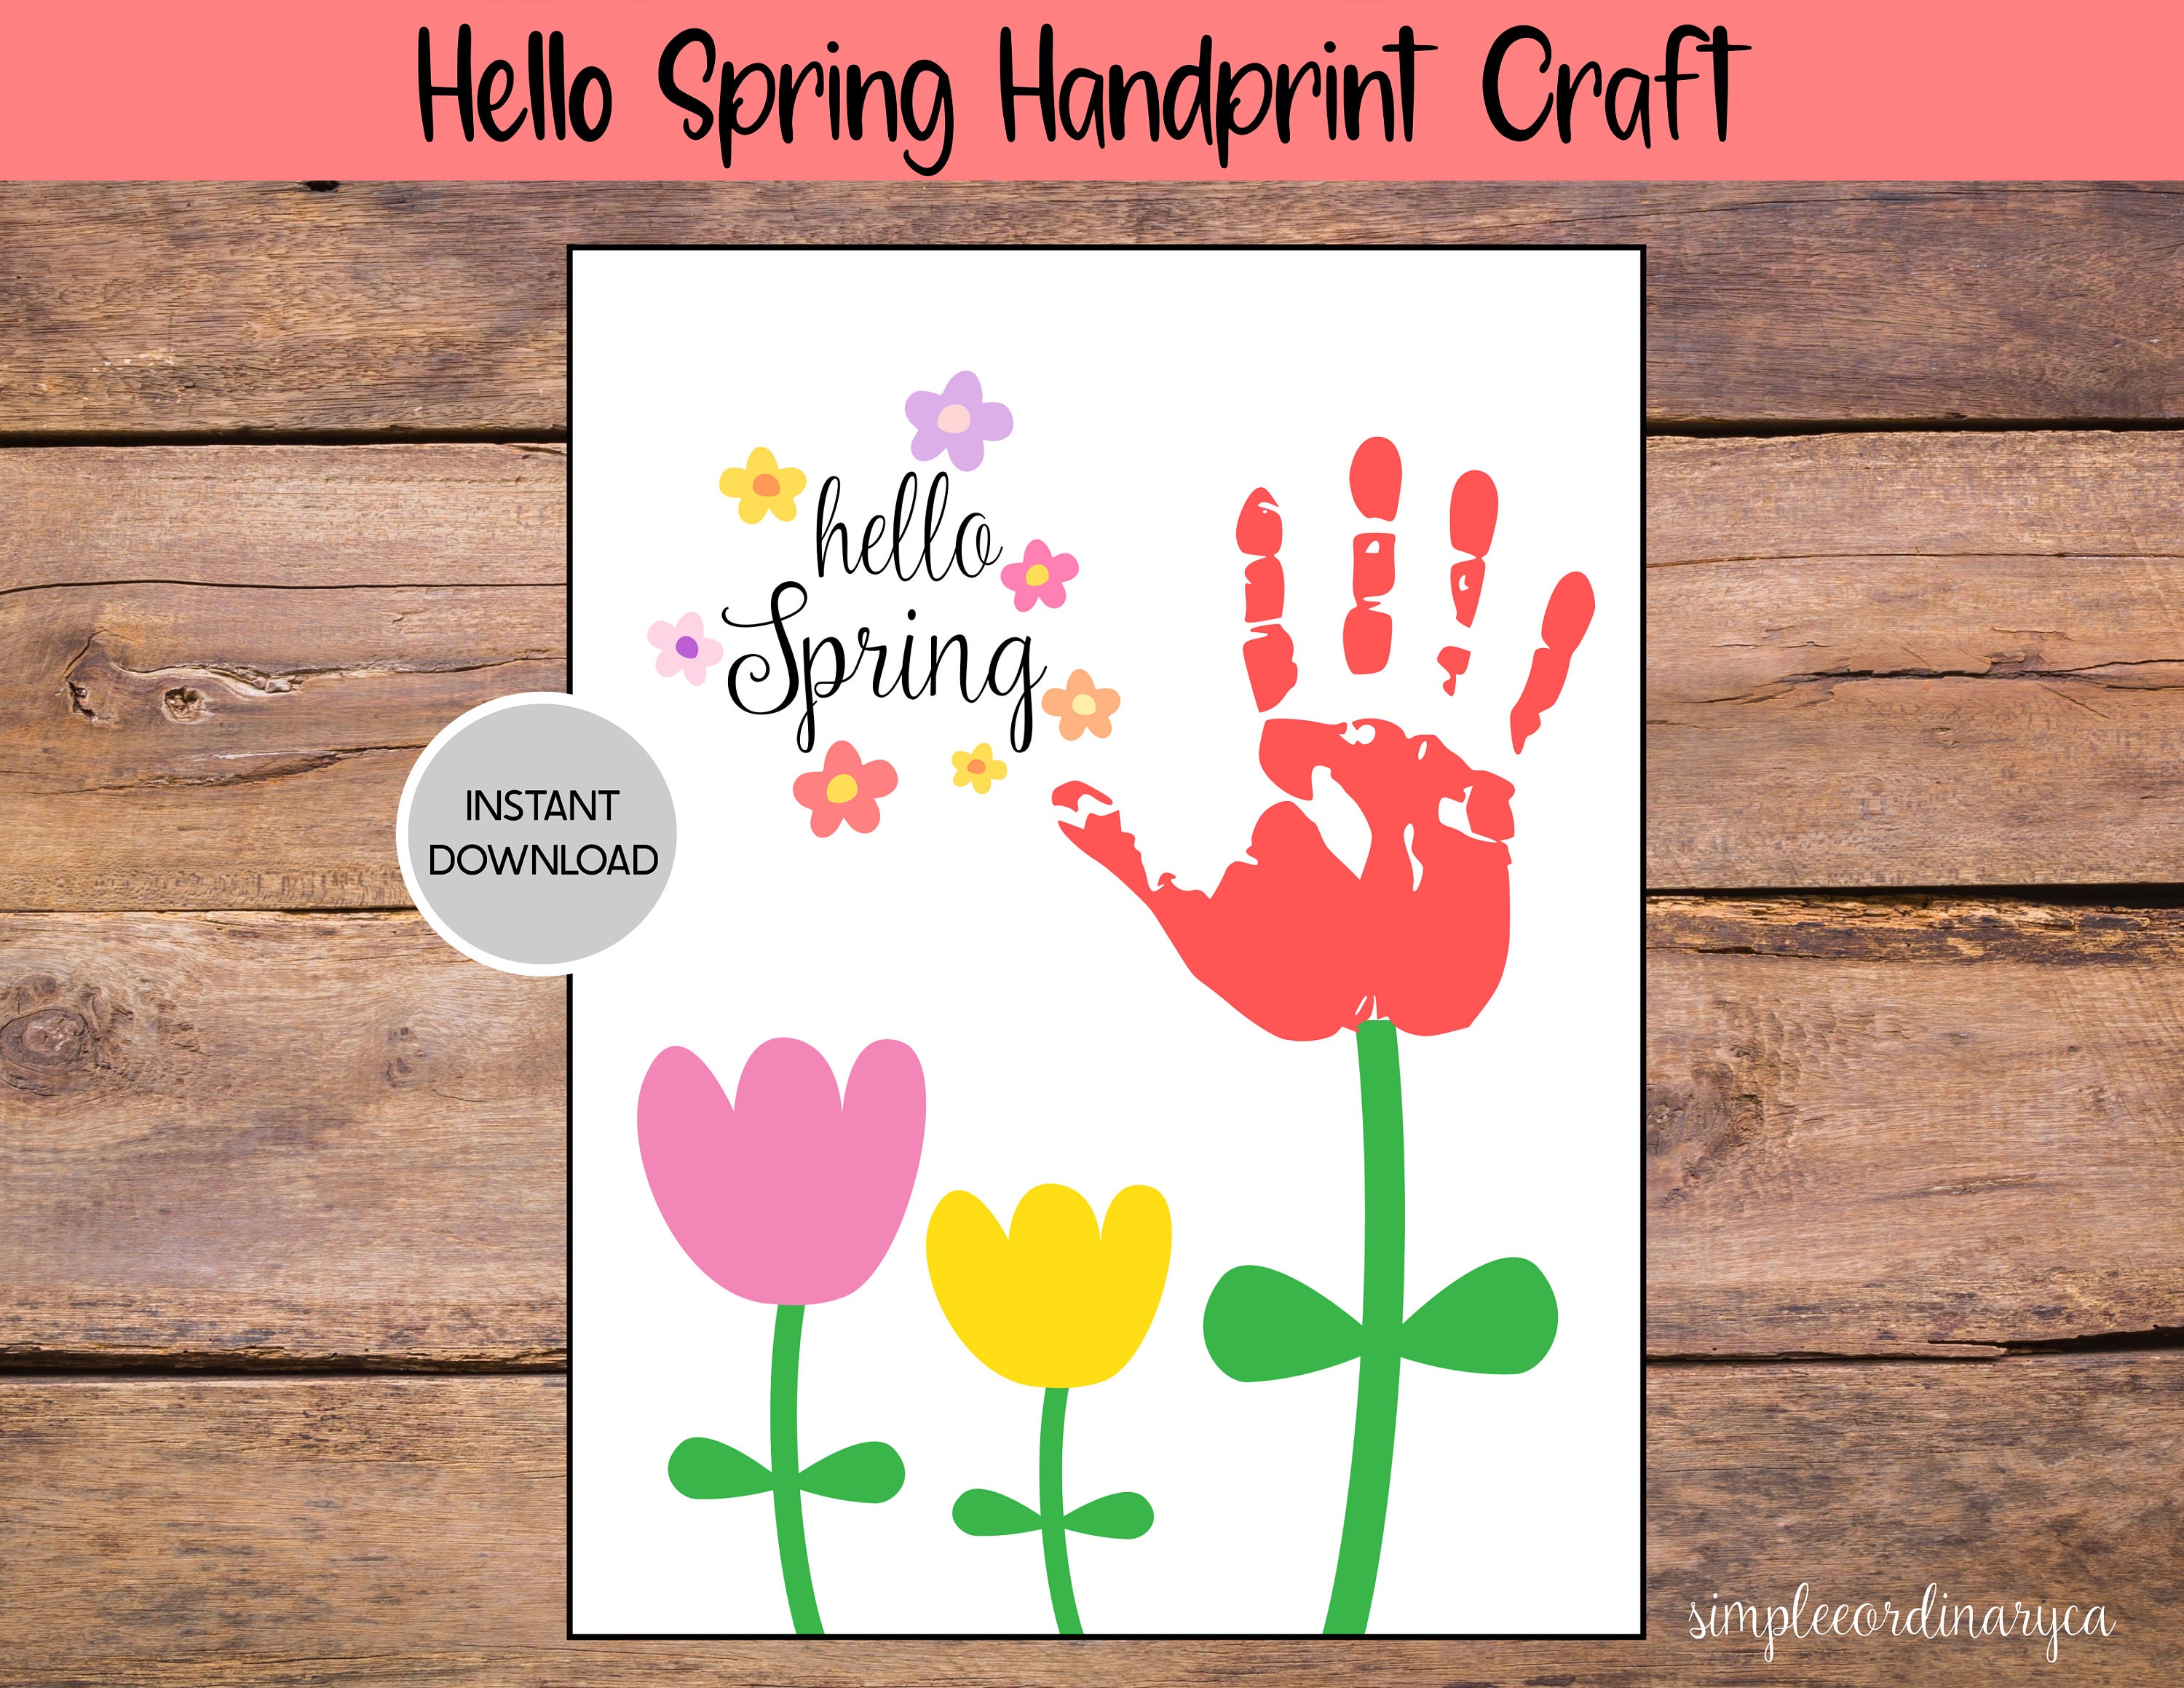 15 Spring Crafts for Toddlers - Milestone Mom, LLC